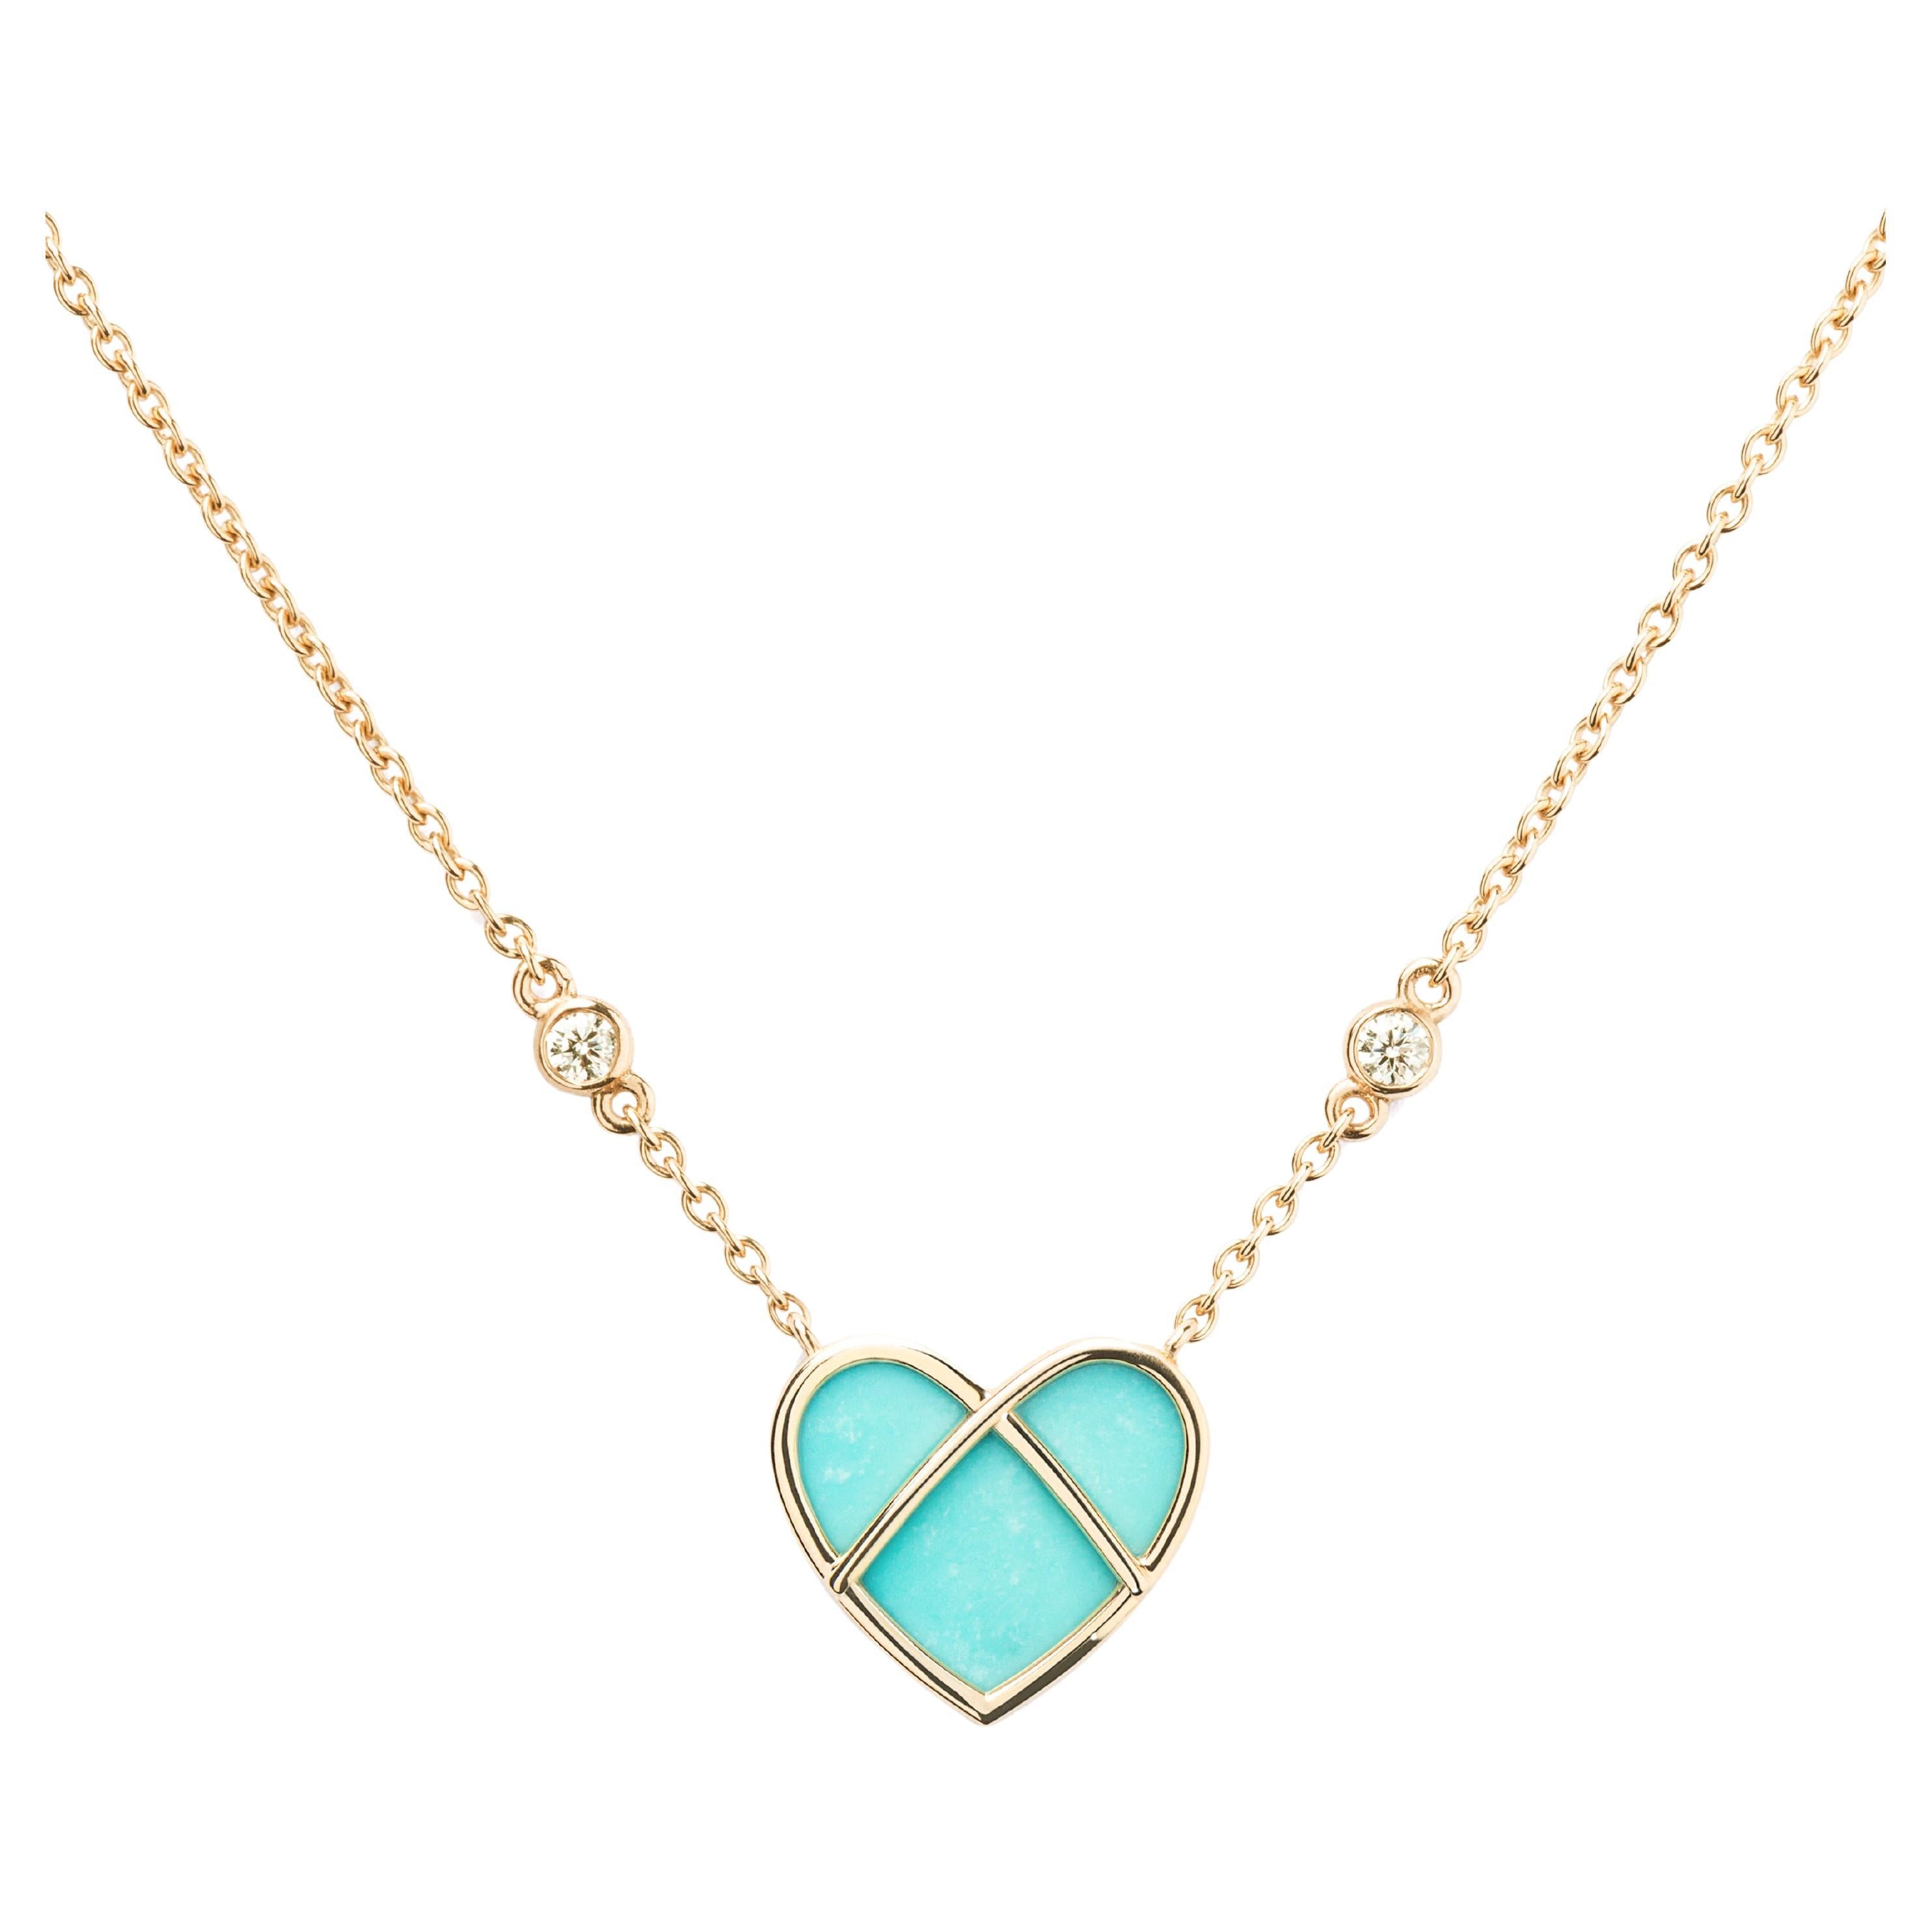 18 Carat Gold Turquoise Necklace, Yellow Gold, L'Attrape Coeur Collection For Sale